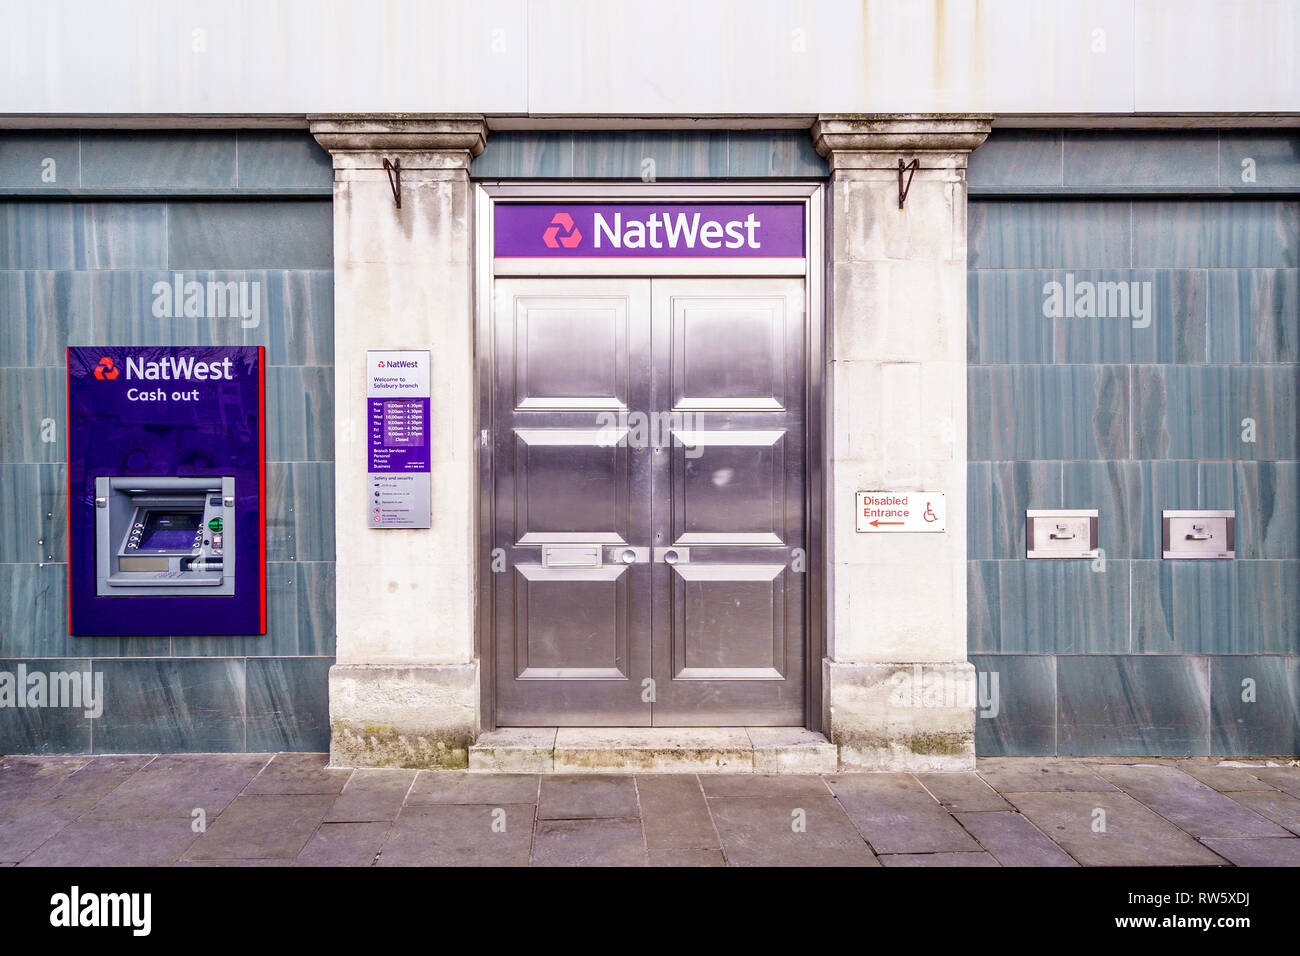 Stainless steel doors and ATM cash machine at the entrance to a branch of the NatWest bank Stock Photo